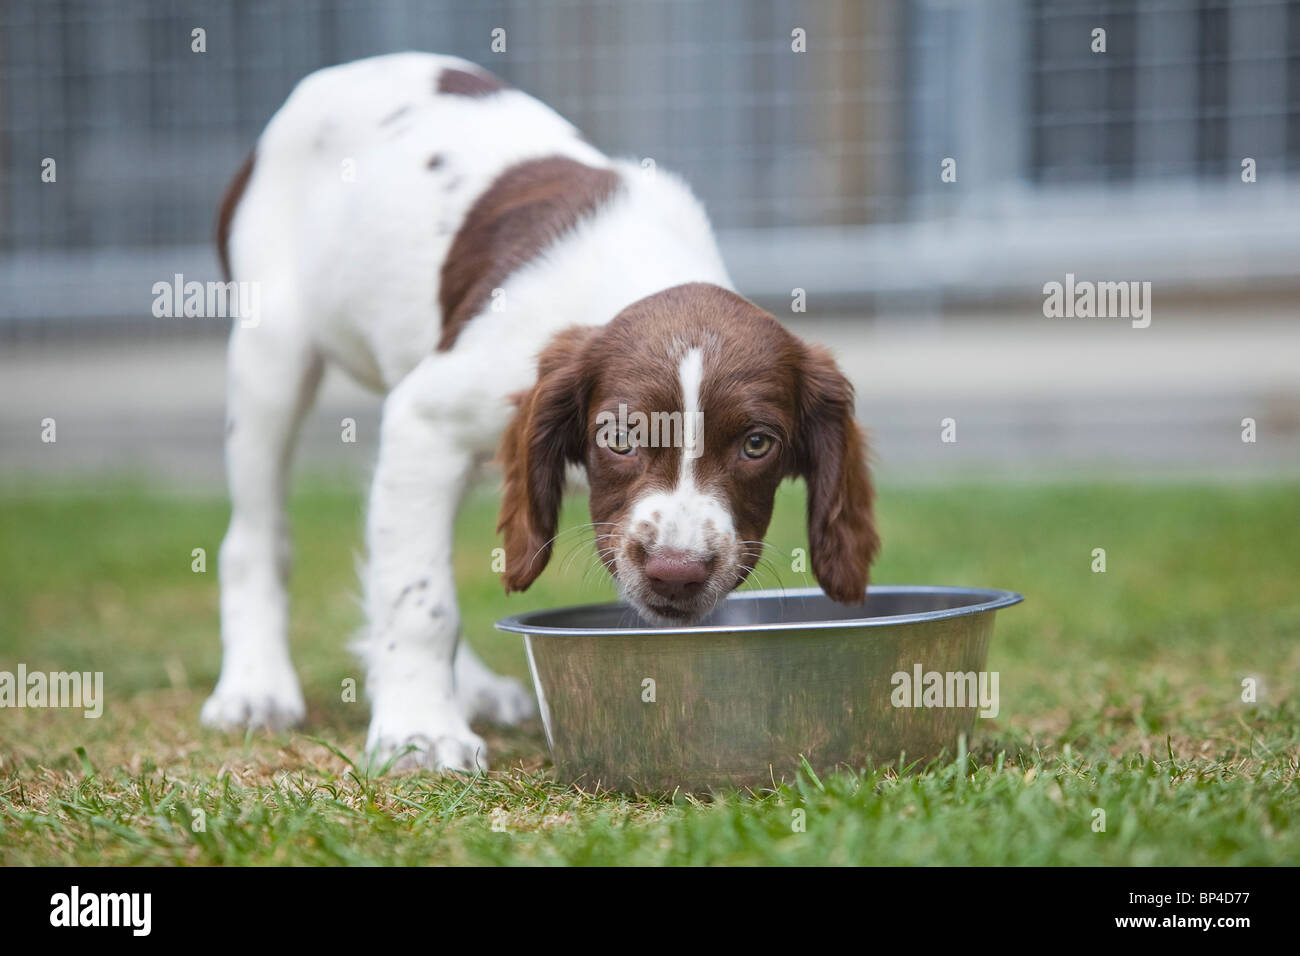 A liver and white English Springer Spaniel puppy eating dog food from a metal dog bowl placed outside in a garden on grass Stock Photo